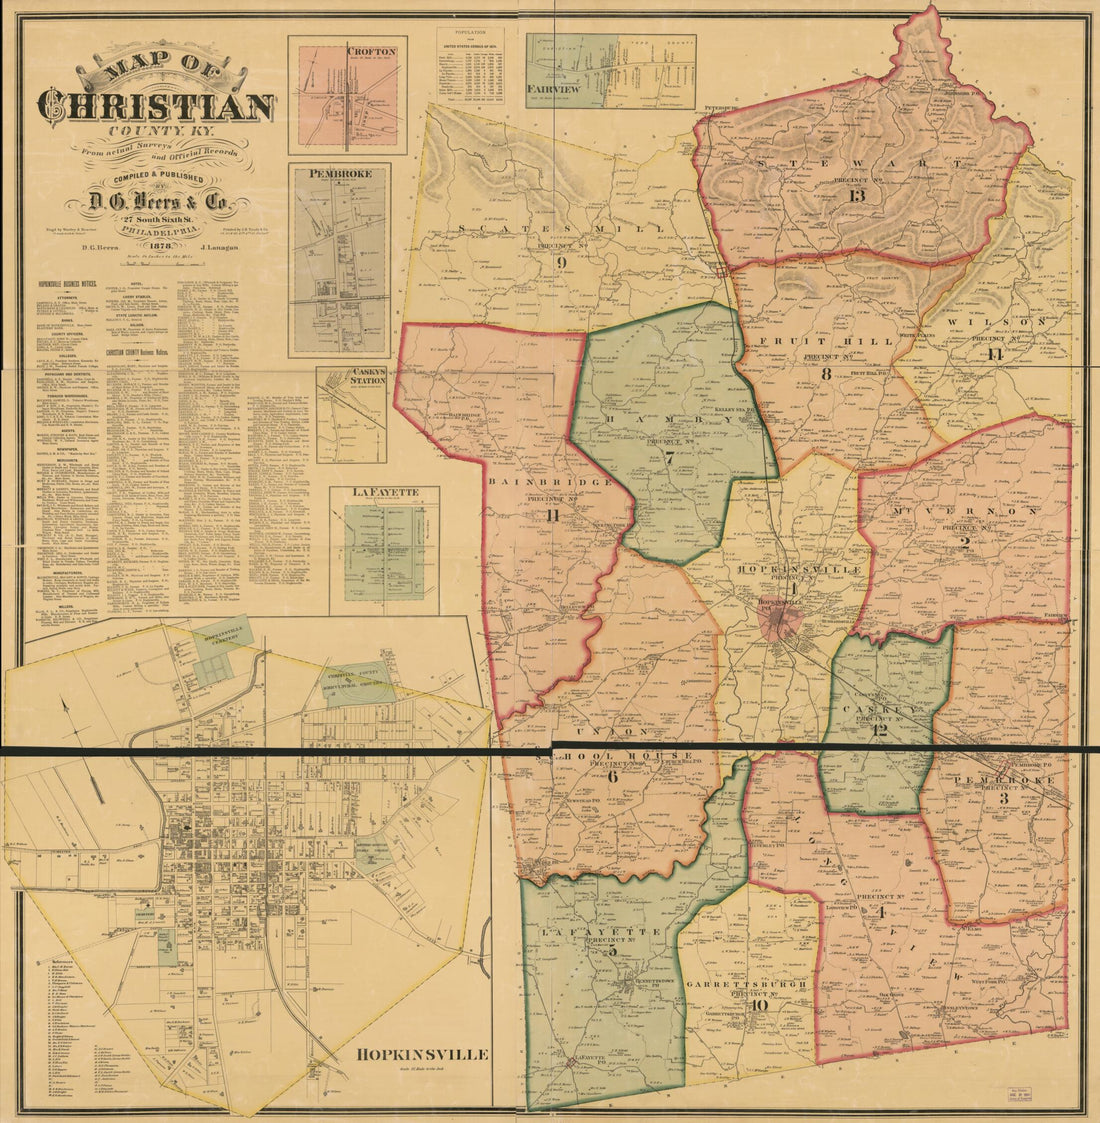 This old map of Map of Christian County, Ky. (Map of Christian County, Kentucky) from 1878 was created by D. G. (Daniel G.) Beers,  D.G. Beers &amp; Co,  H.J. Toudy &amp; Co, J. Lanagan,  Worley &amp; Bracher in 1878